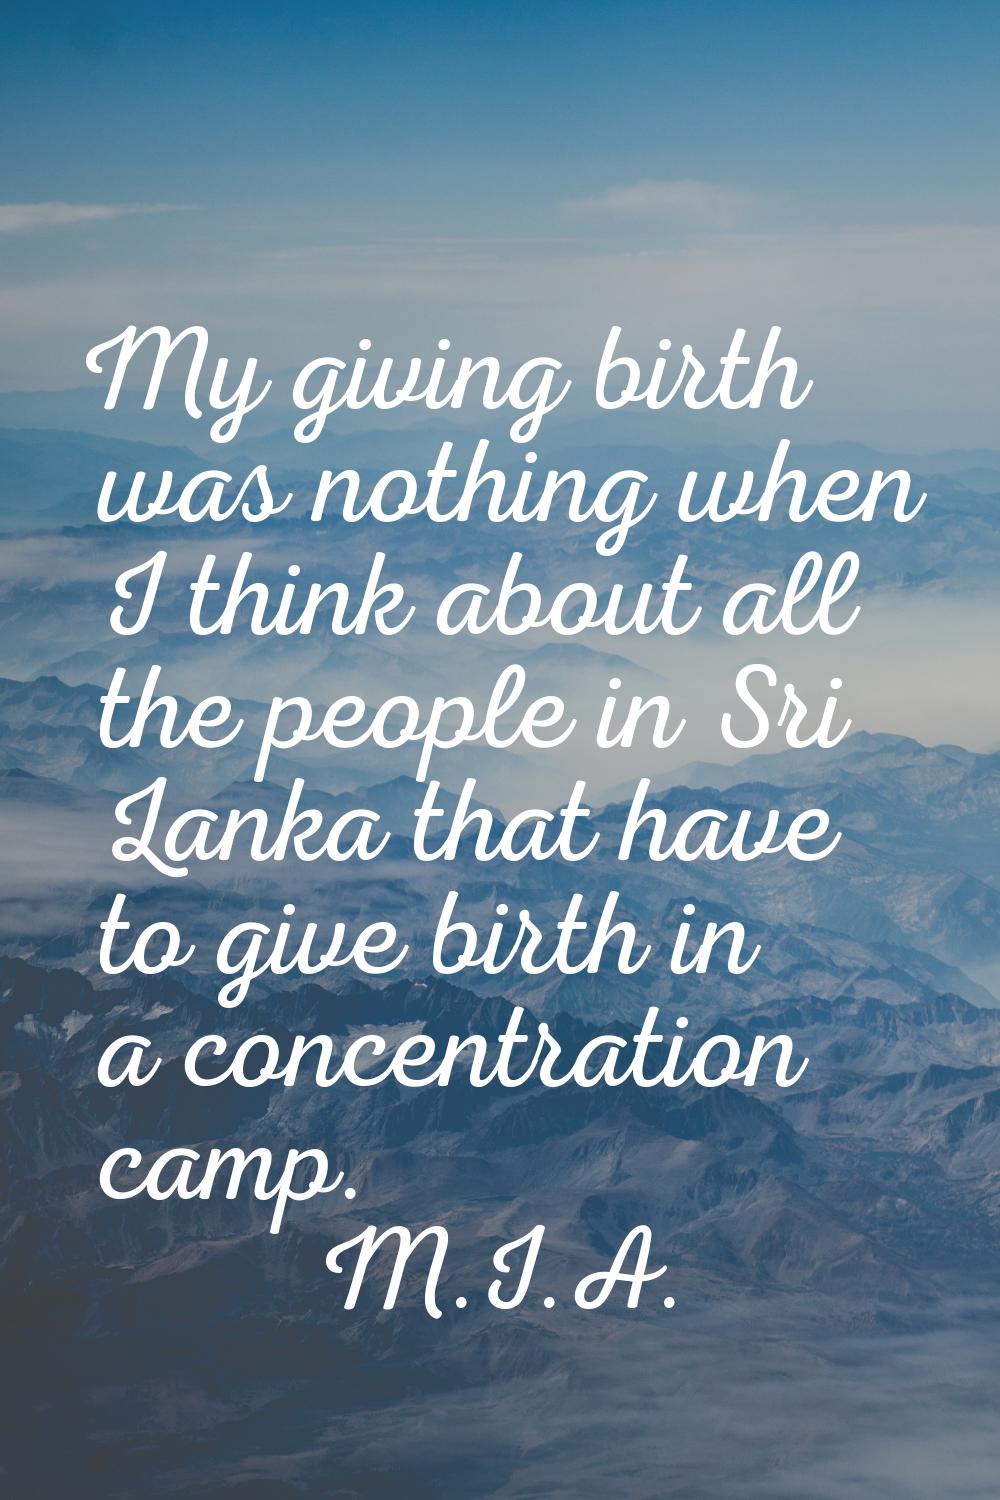 My giving birth was nothing when I think about all the people in Sri Lanka that have to give birth 